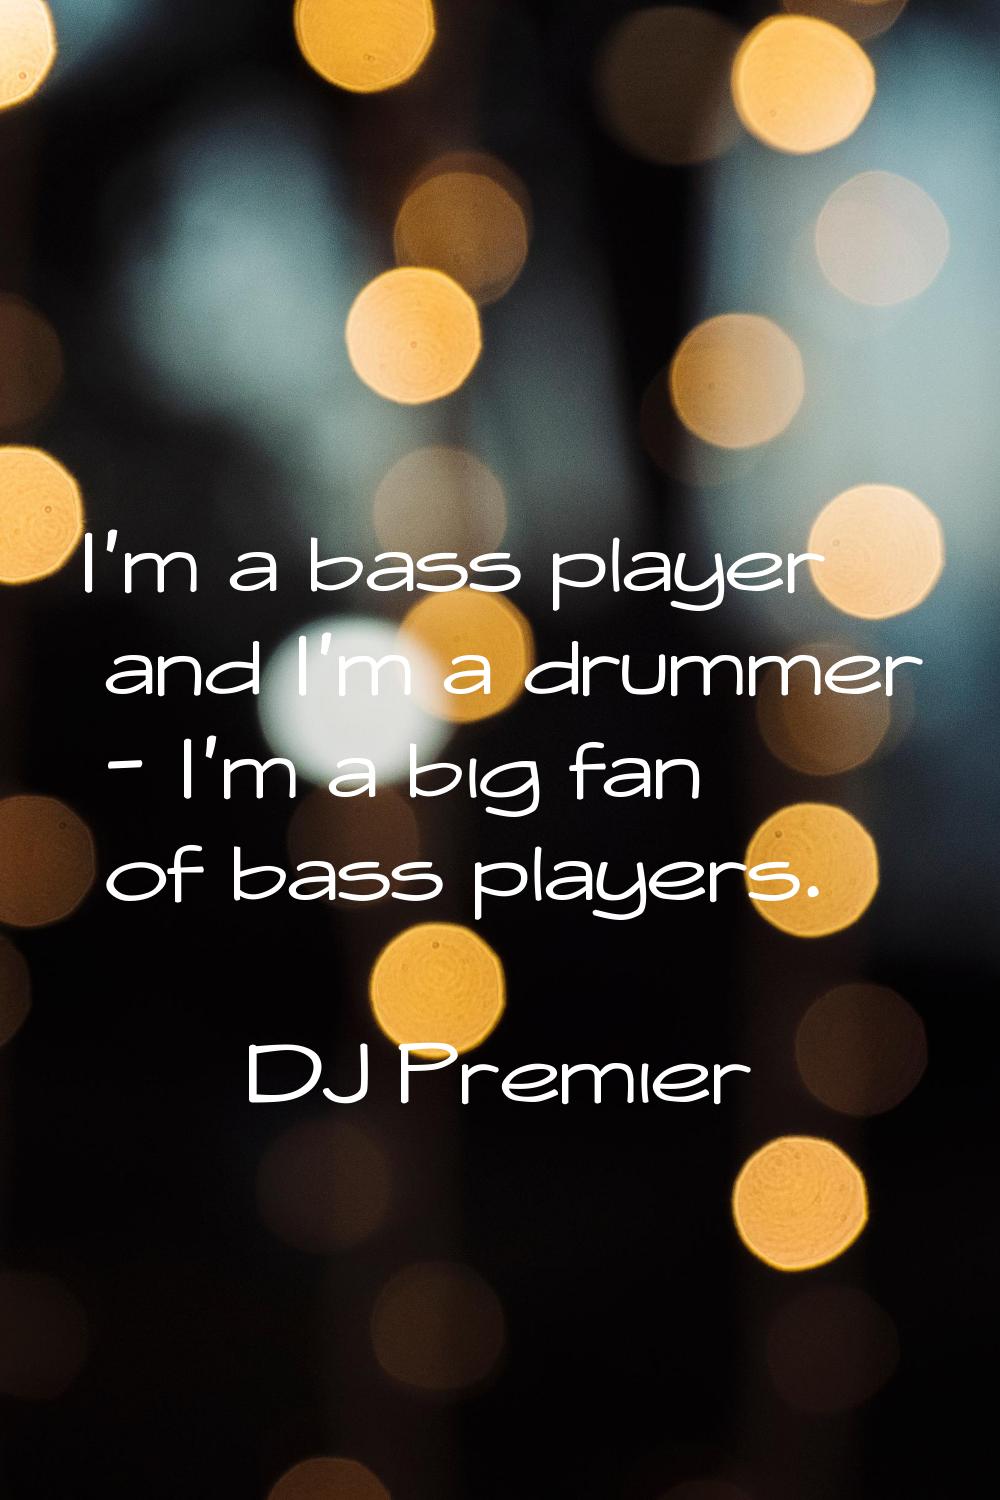 I'm a bass player and I'm a drummer - I'm a big fan of bass players.